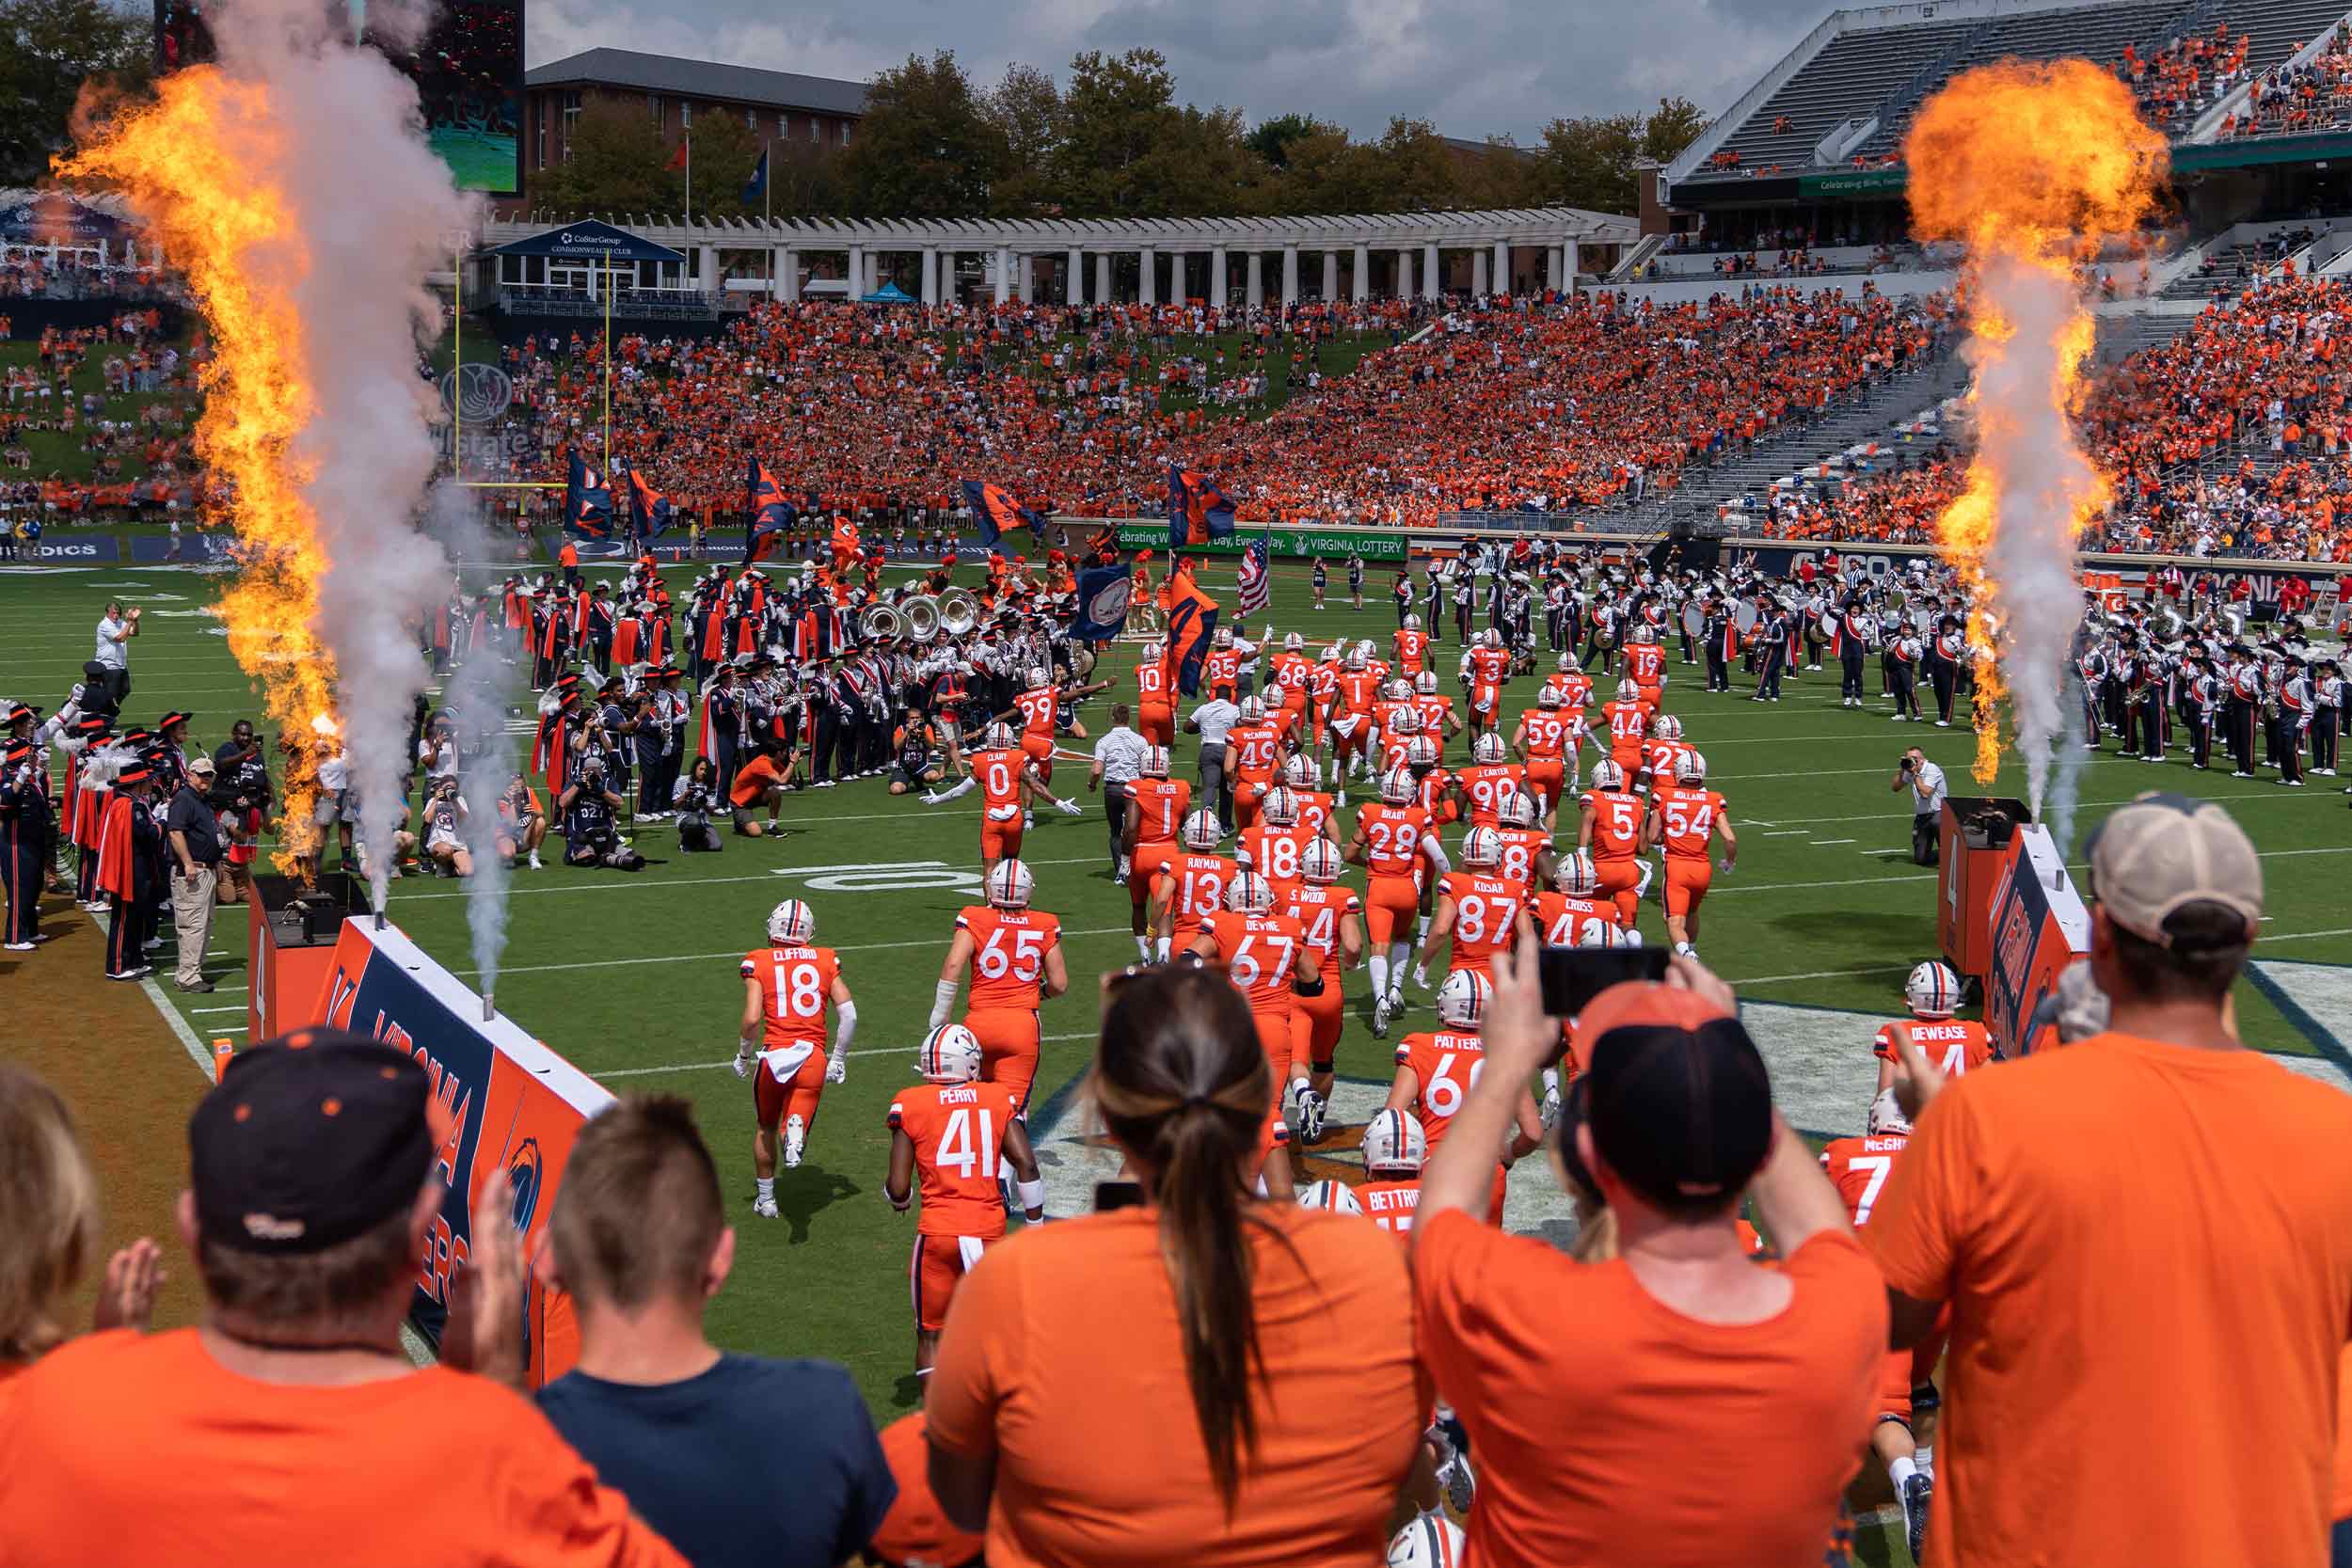 UVA football team running onto the field while flame shoots up into the air while the fans cheer